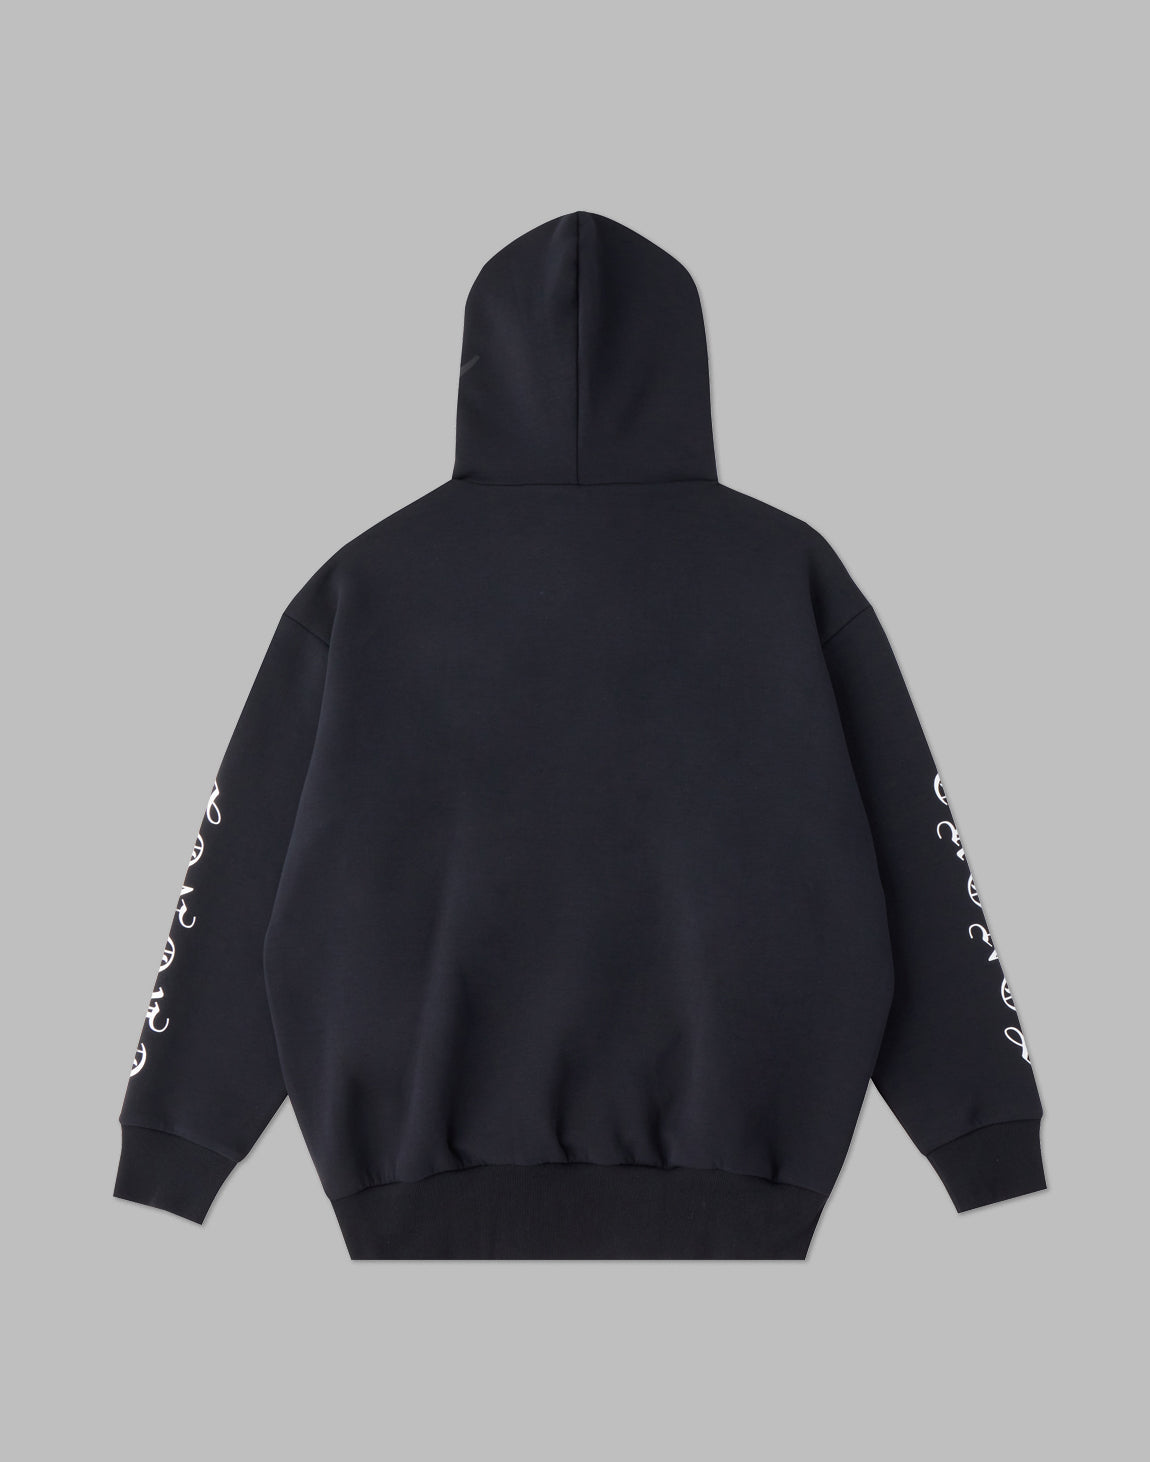 CRONOS BLACK LETTER LOGO HOODIE – クロノス CRONOS Official Store